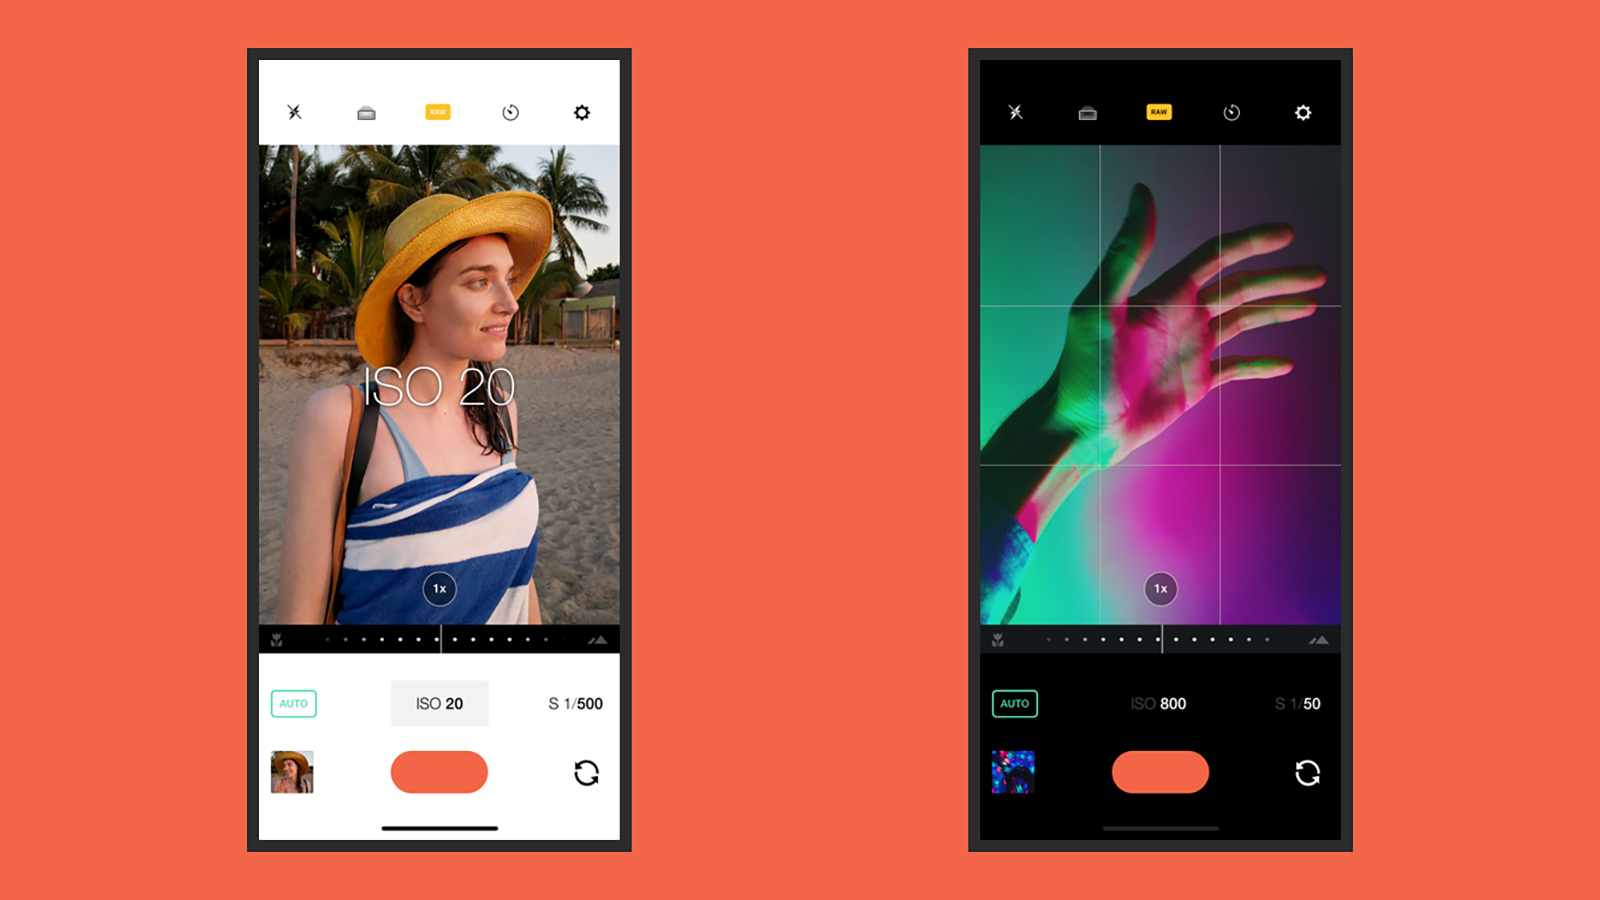 7 Camera Apps Better Than The One On Your Phone